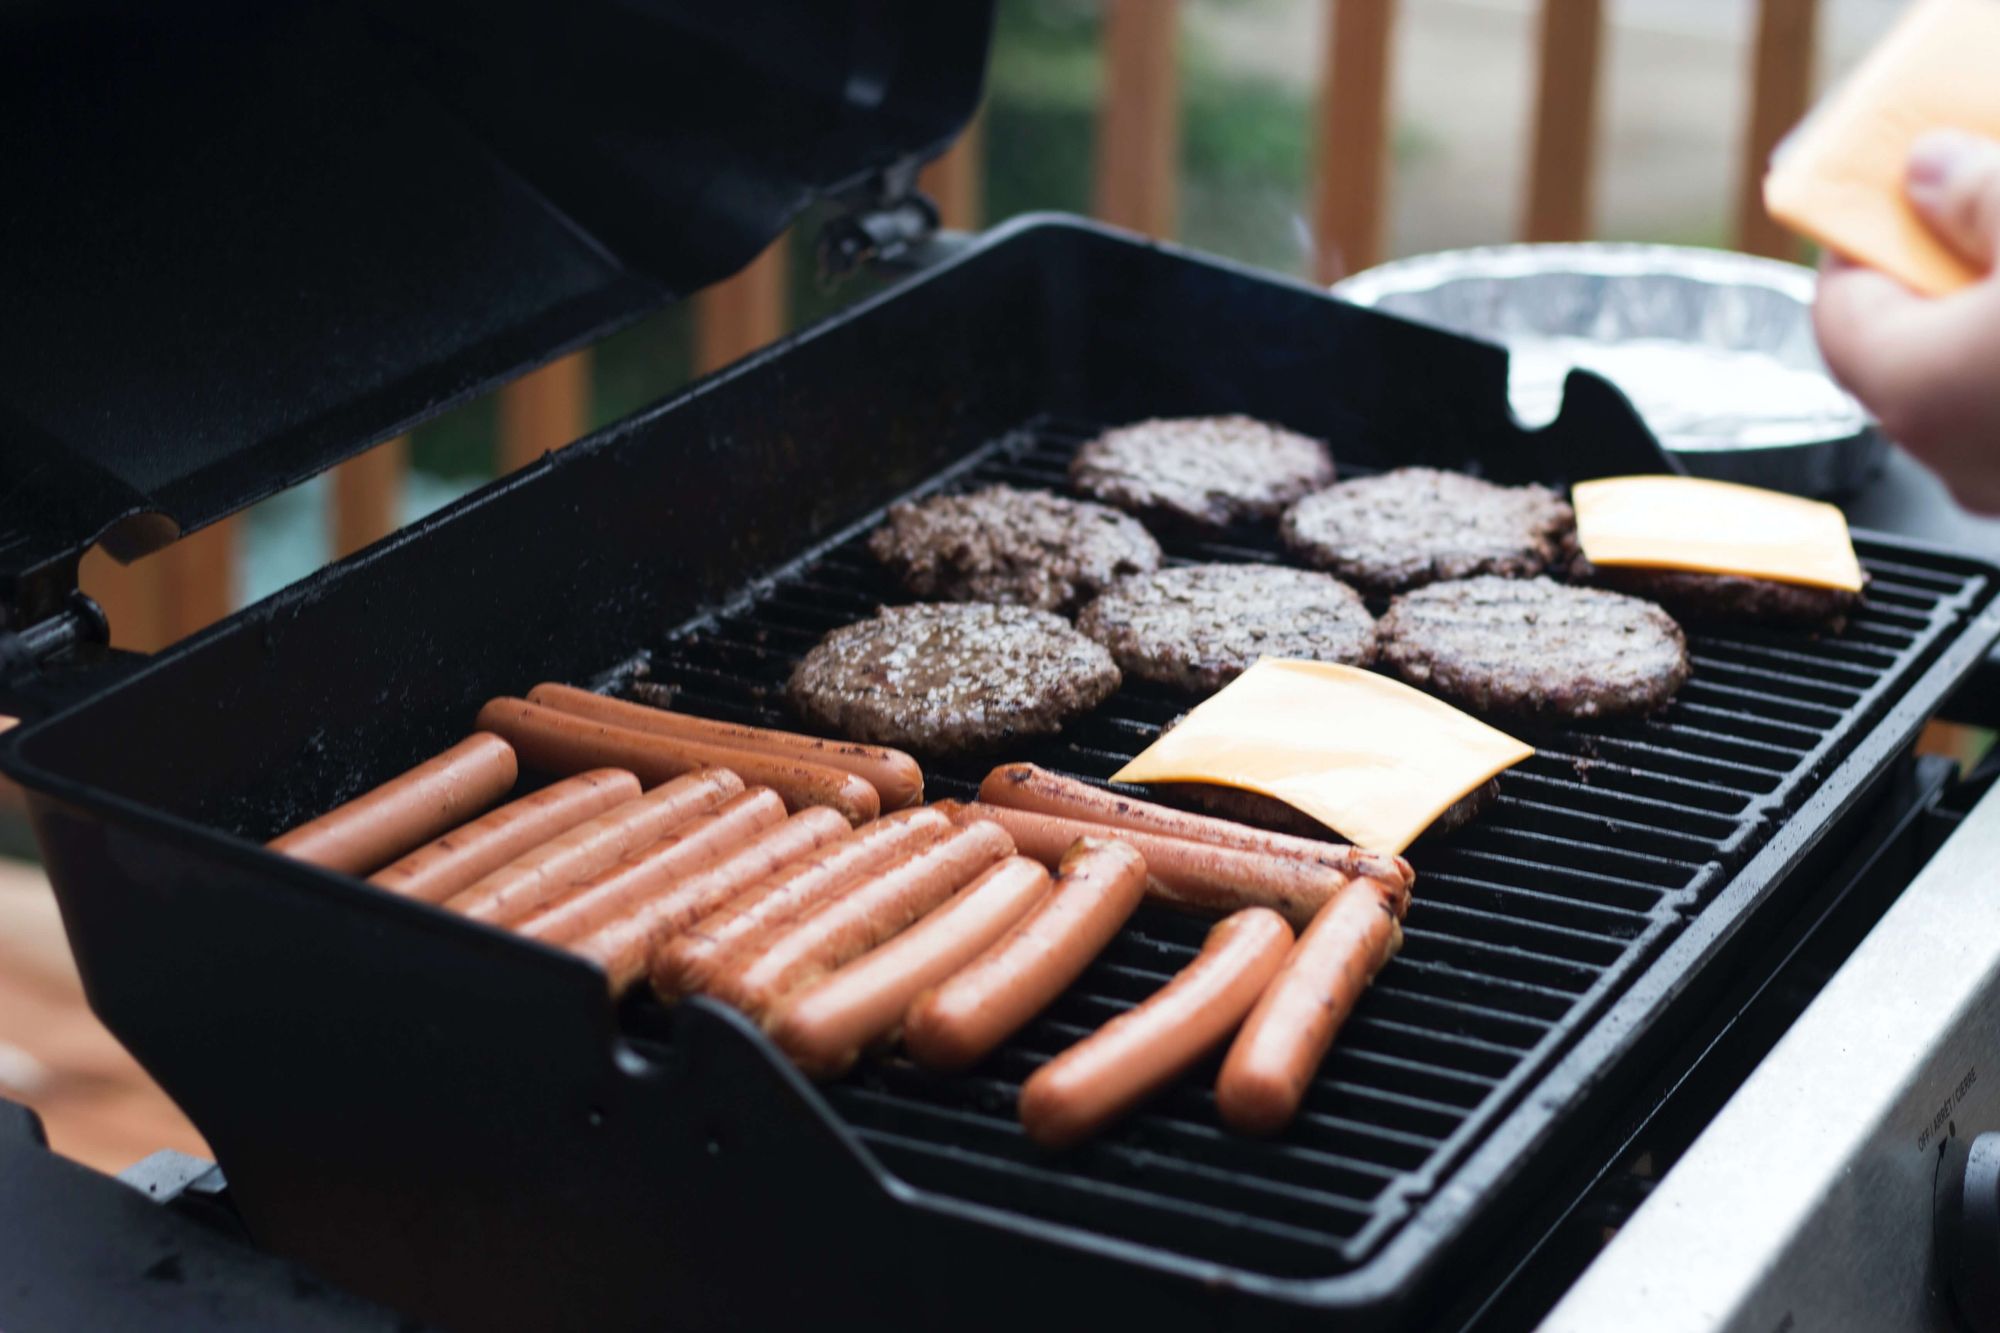 An outdoor grill with burgers and hot dogs cooking.